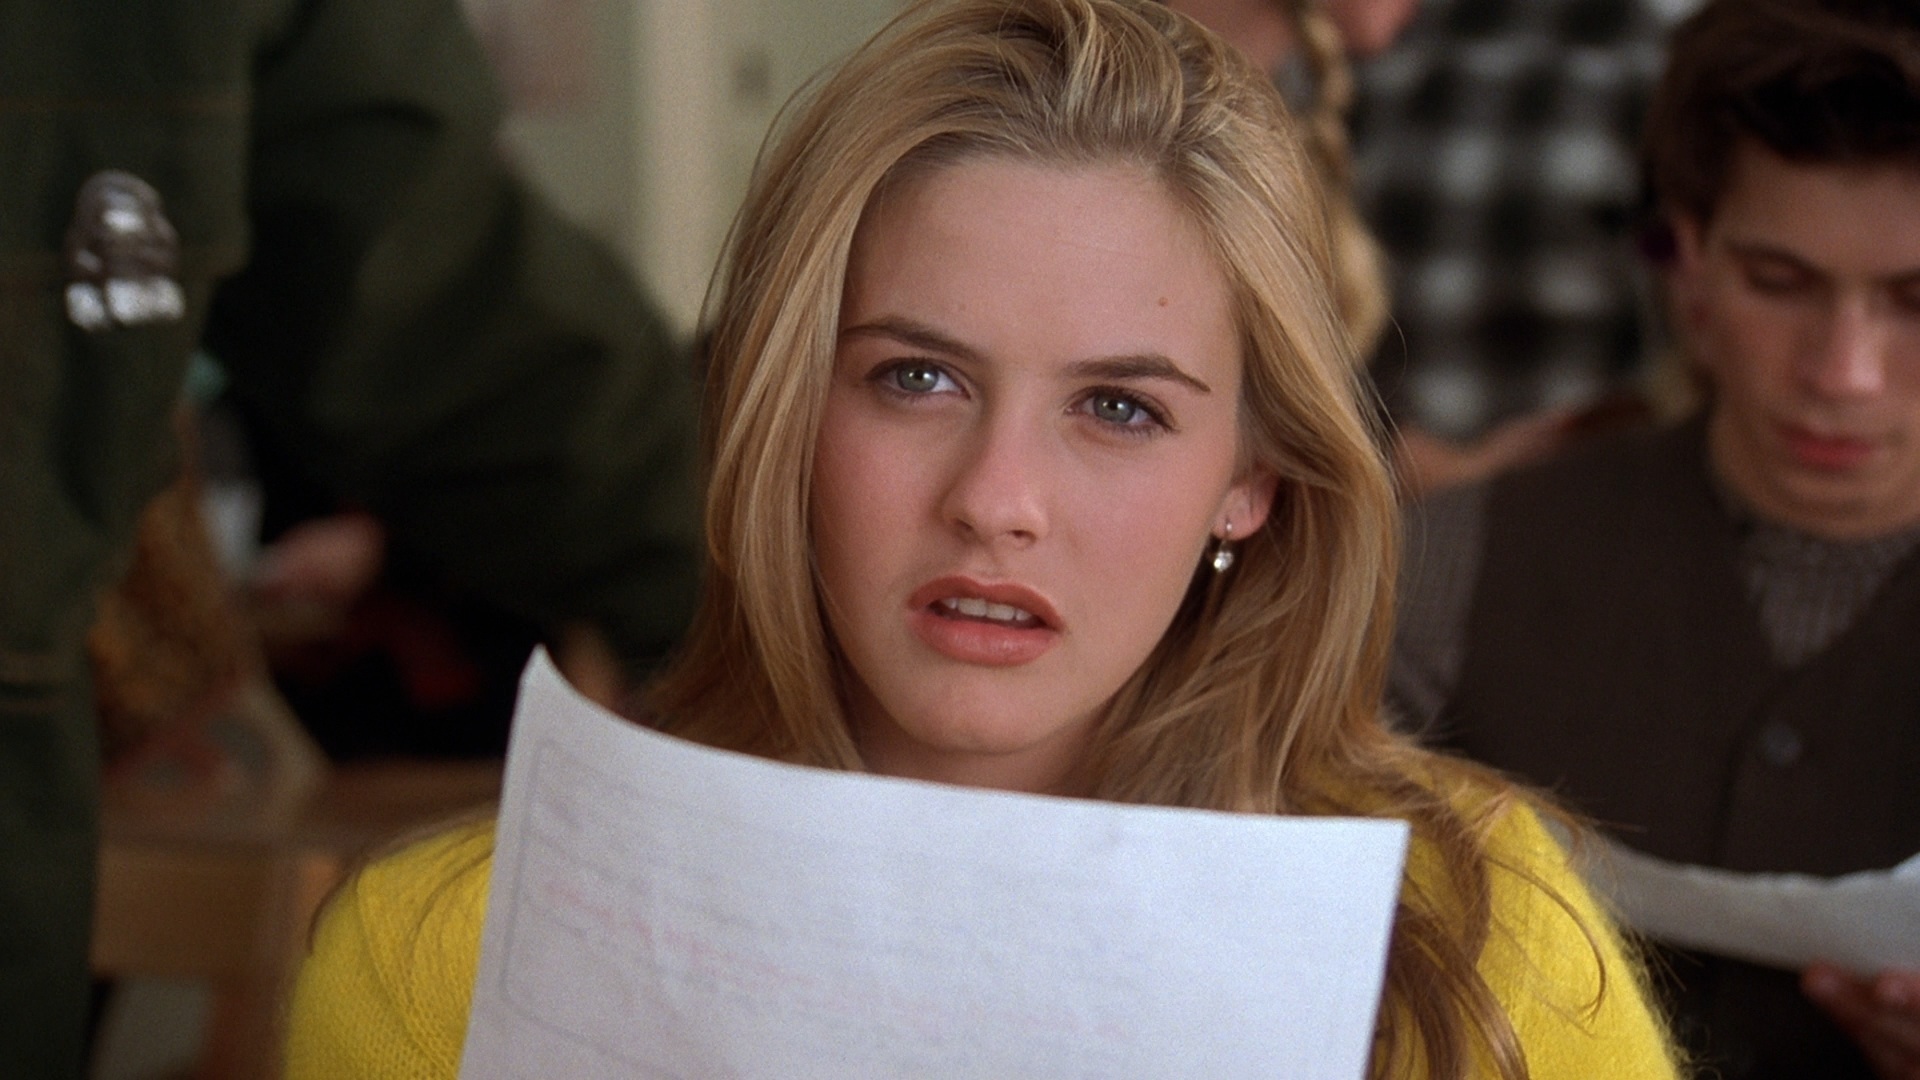 The Shadow In Film: Cher Horowitz, Clueless. Cher is the selfish, vain, and superficial daughter of a wealthy Beverly Hills attorney whose only direction in life is "toward the mall”. A series of mishaps compels her to reflects on her priorities and her repeated failures to understand or appreciate the people in her life.